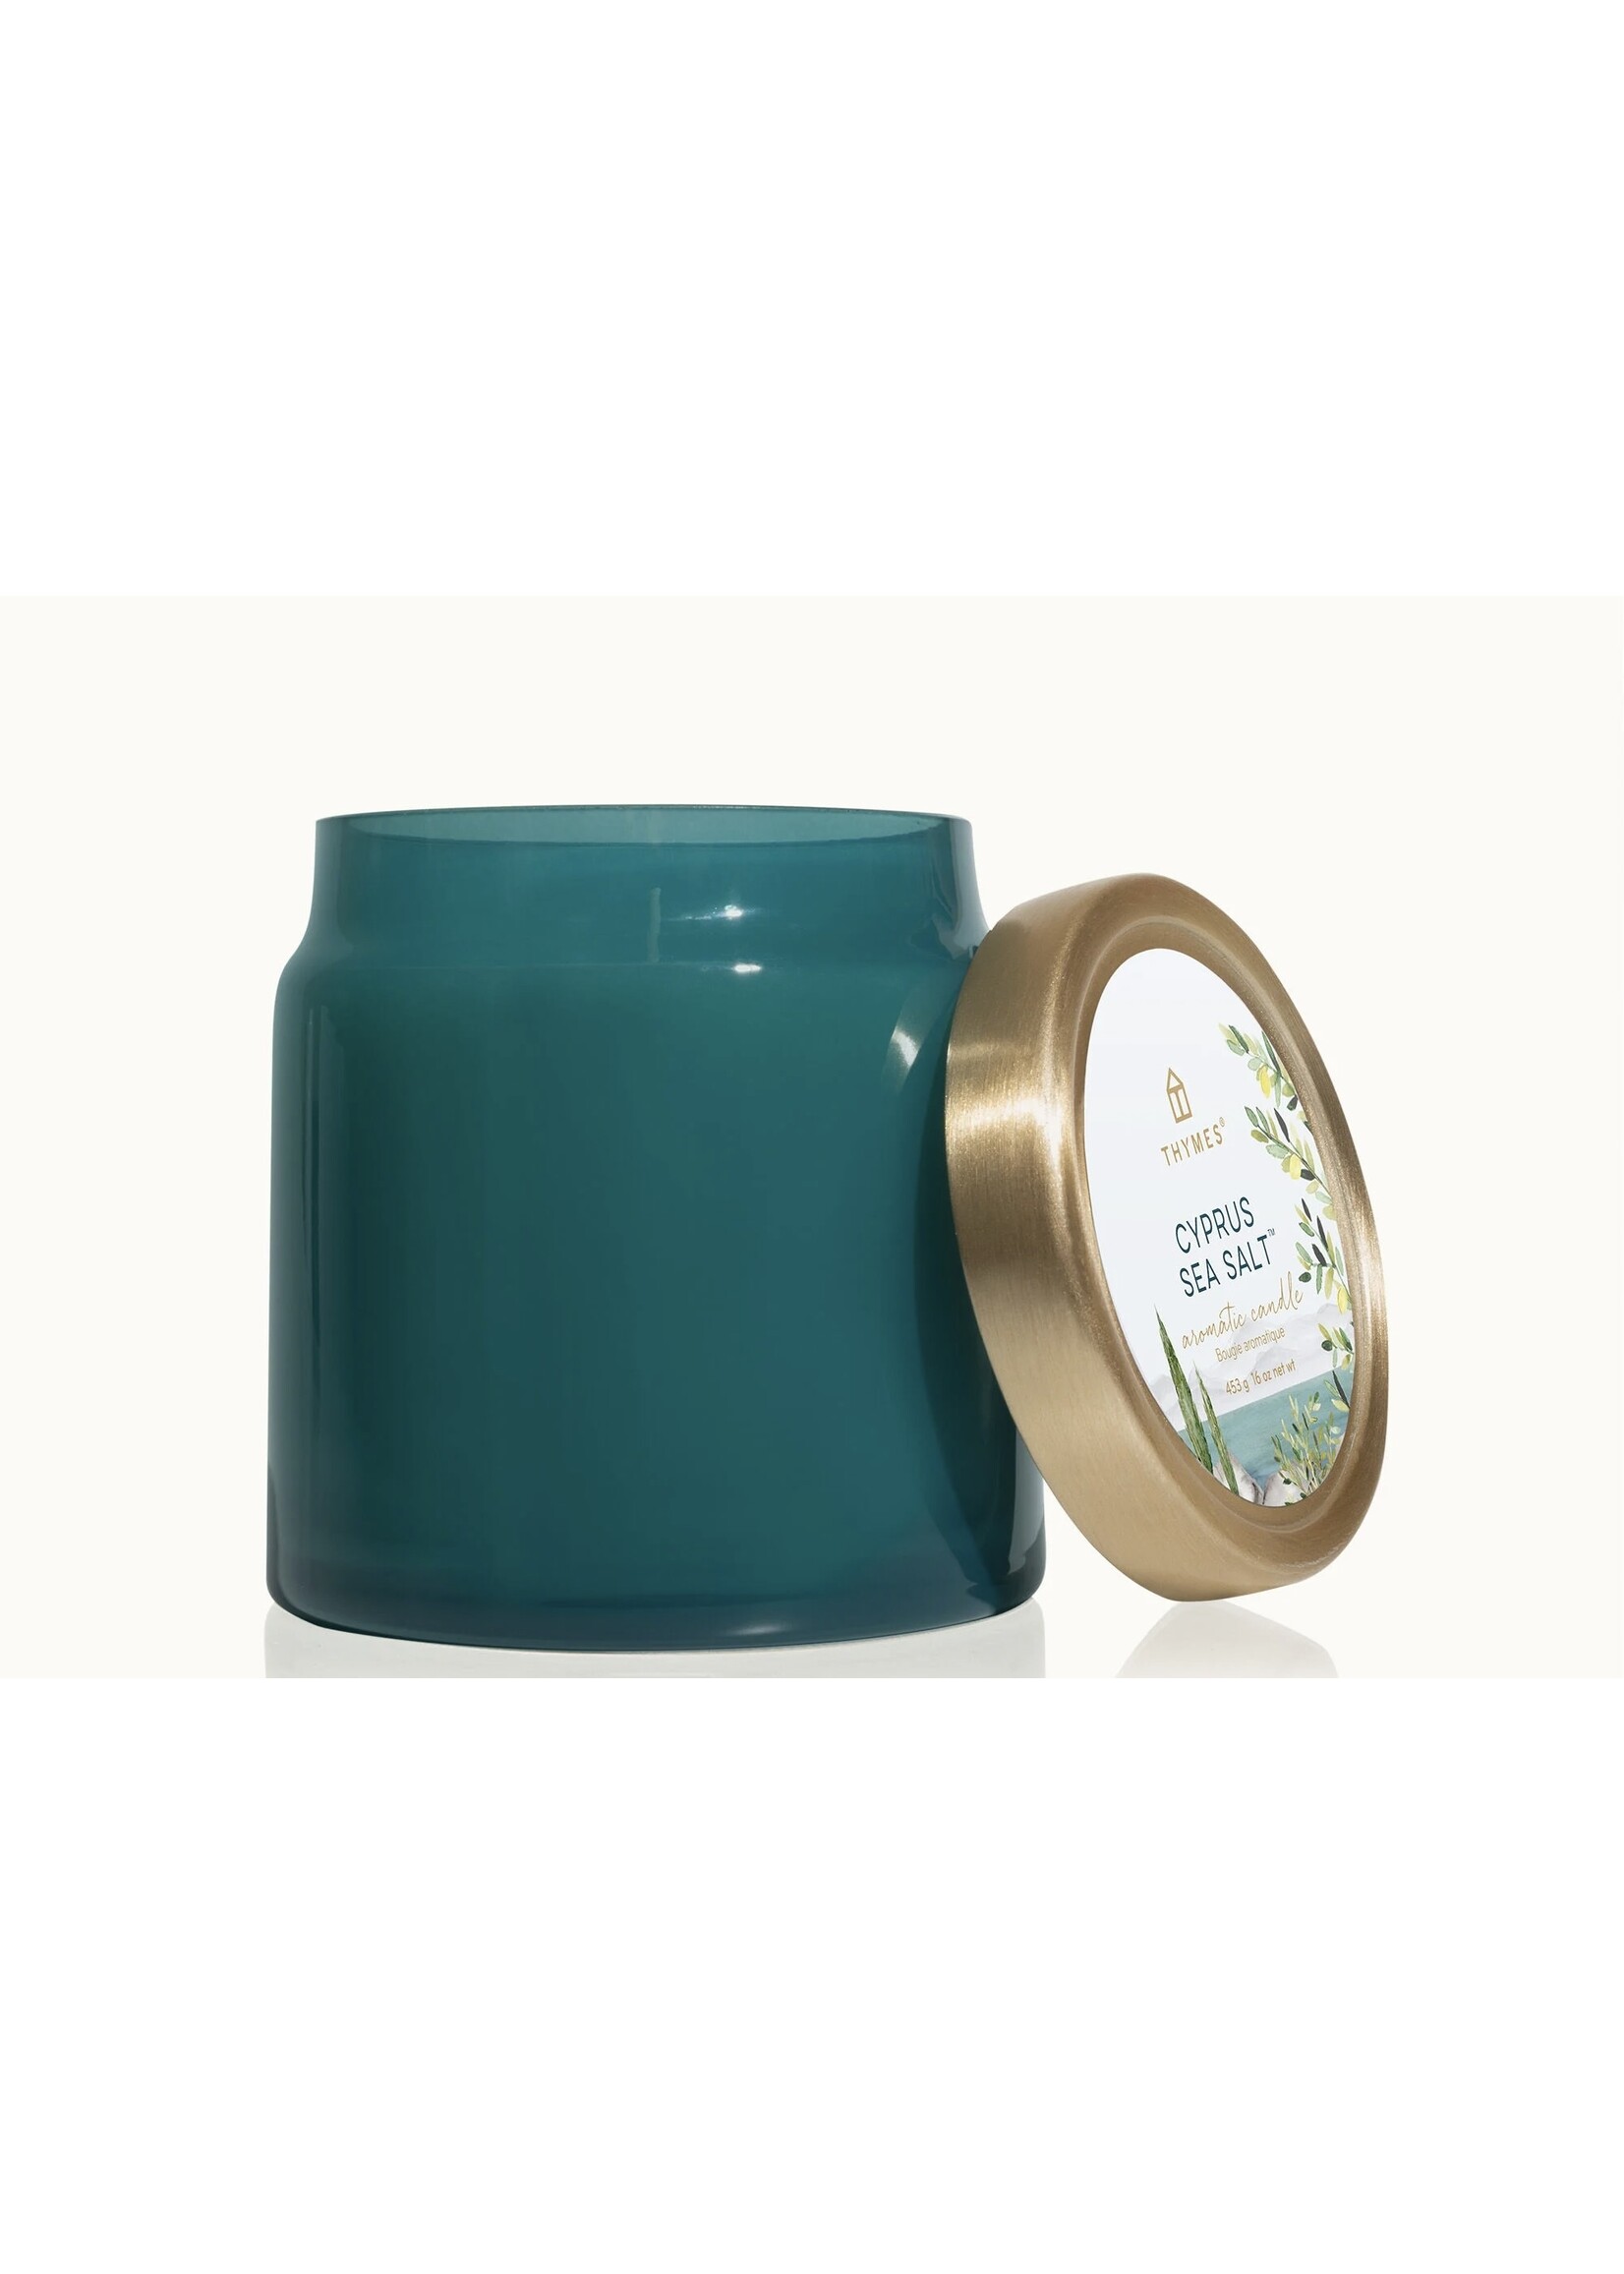 Thymes Cyprus Sea Salt Poured Candle Glass Jar